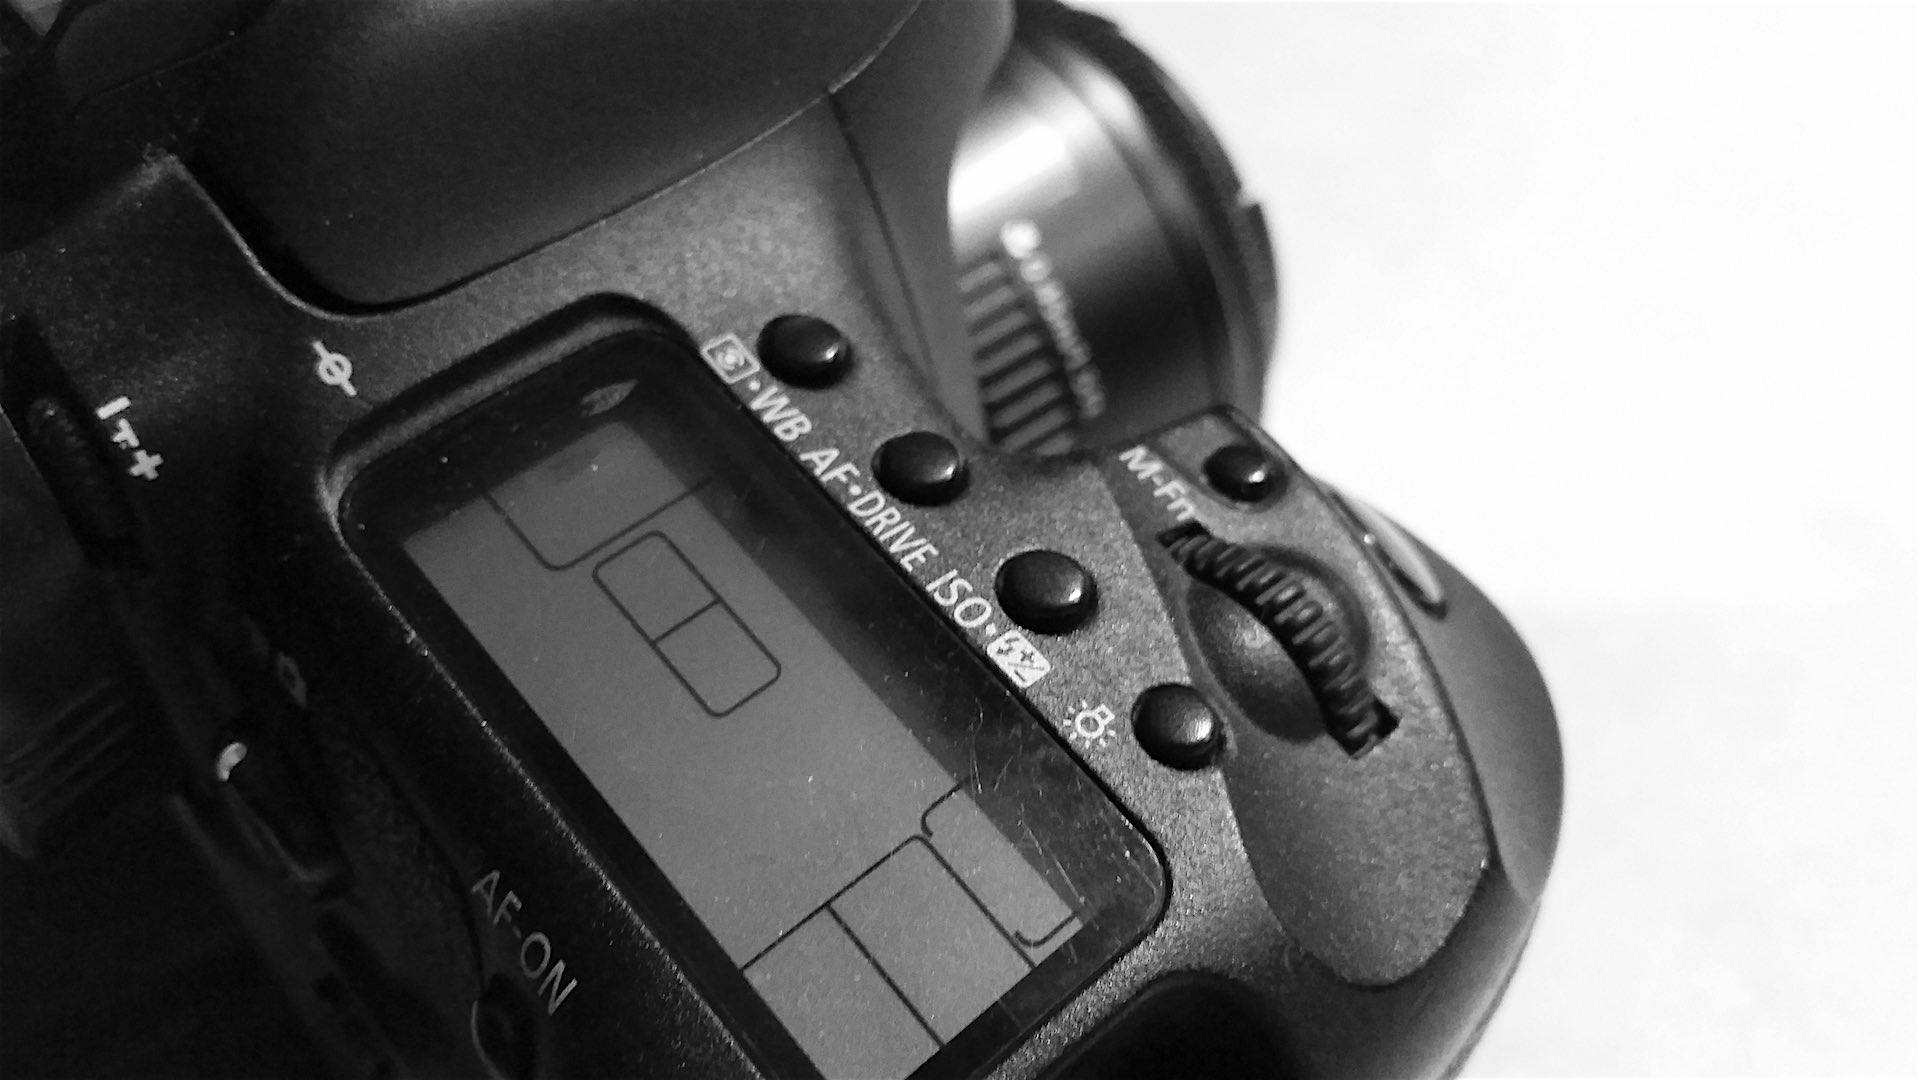 Do you know what all the buttons on your camera do?